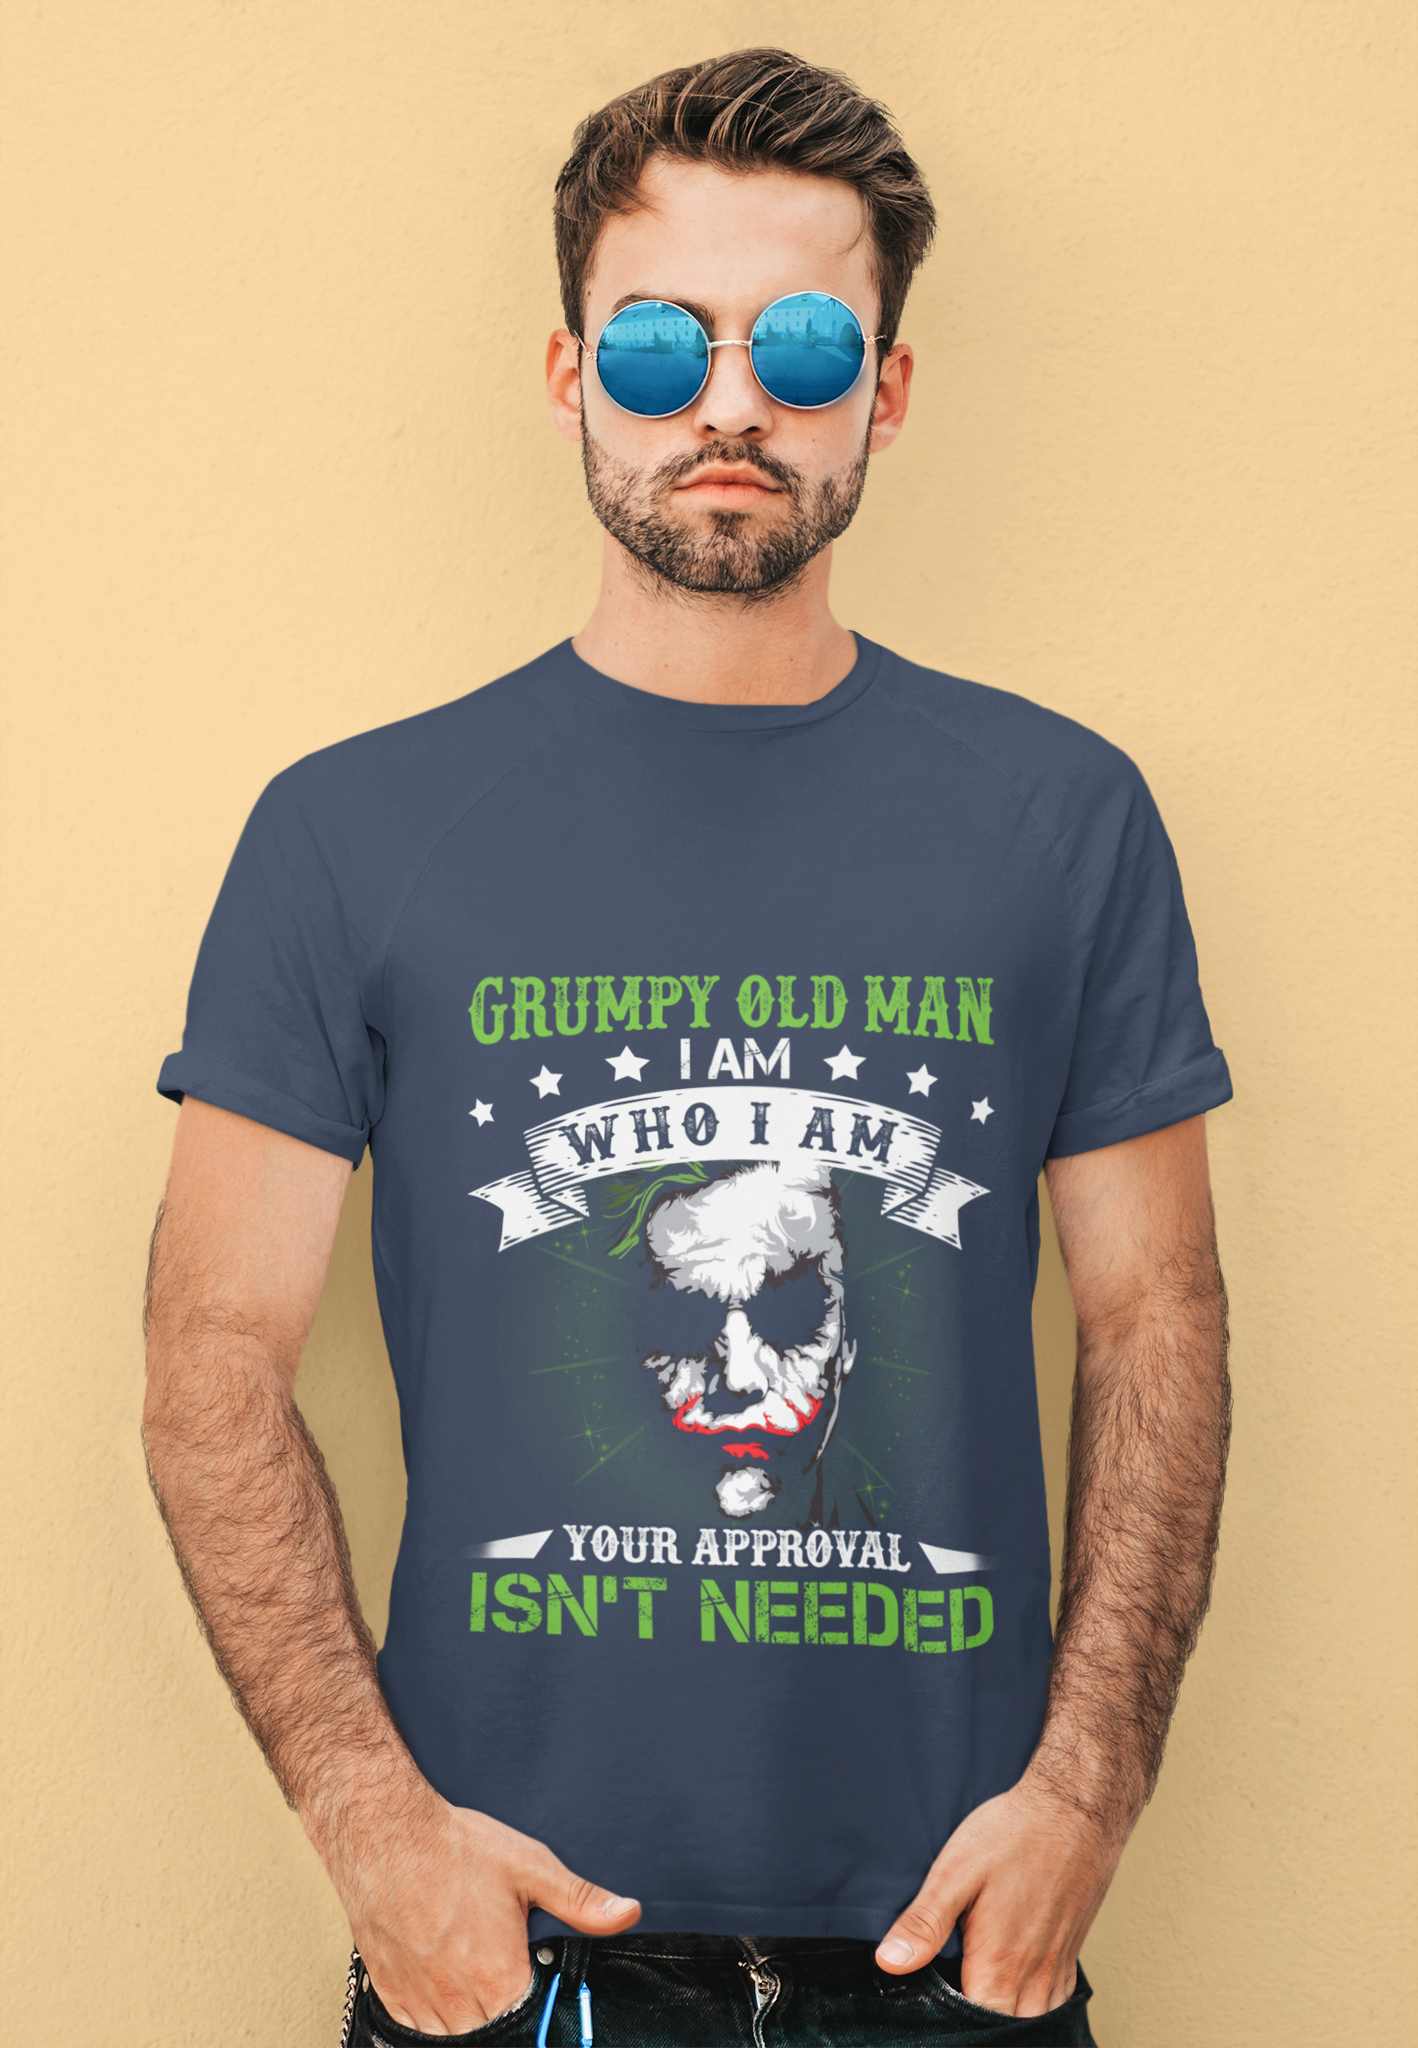 Joker T Shirt, Joker The Anarchist T Shirt, Grumpy Old Man I Am Who I Am Your Approval Isnt Needed Tshirt, Halloween Gifts